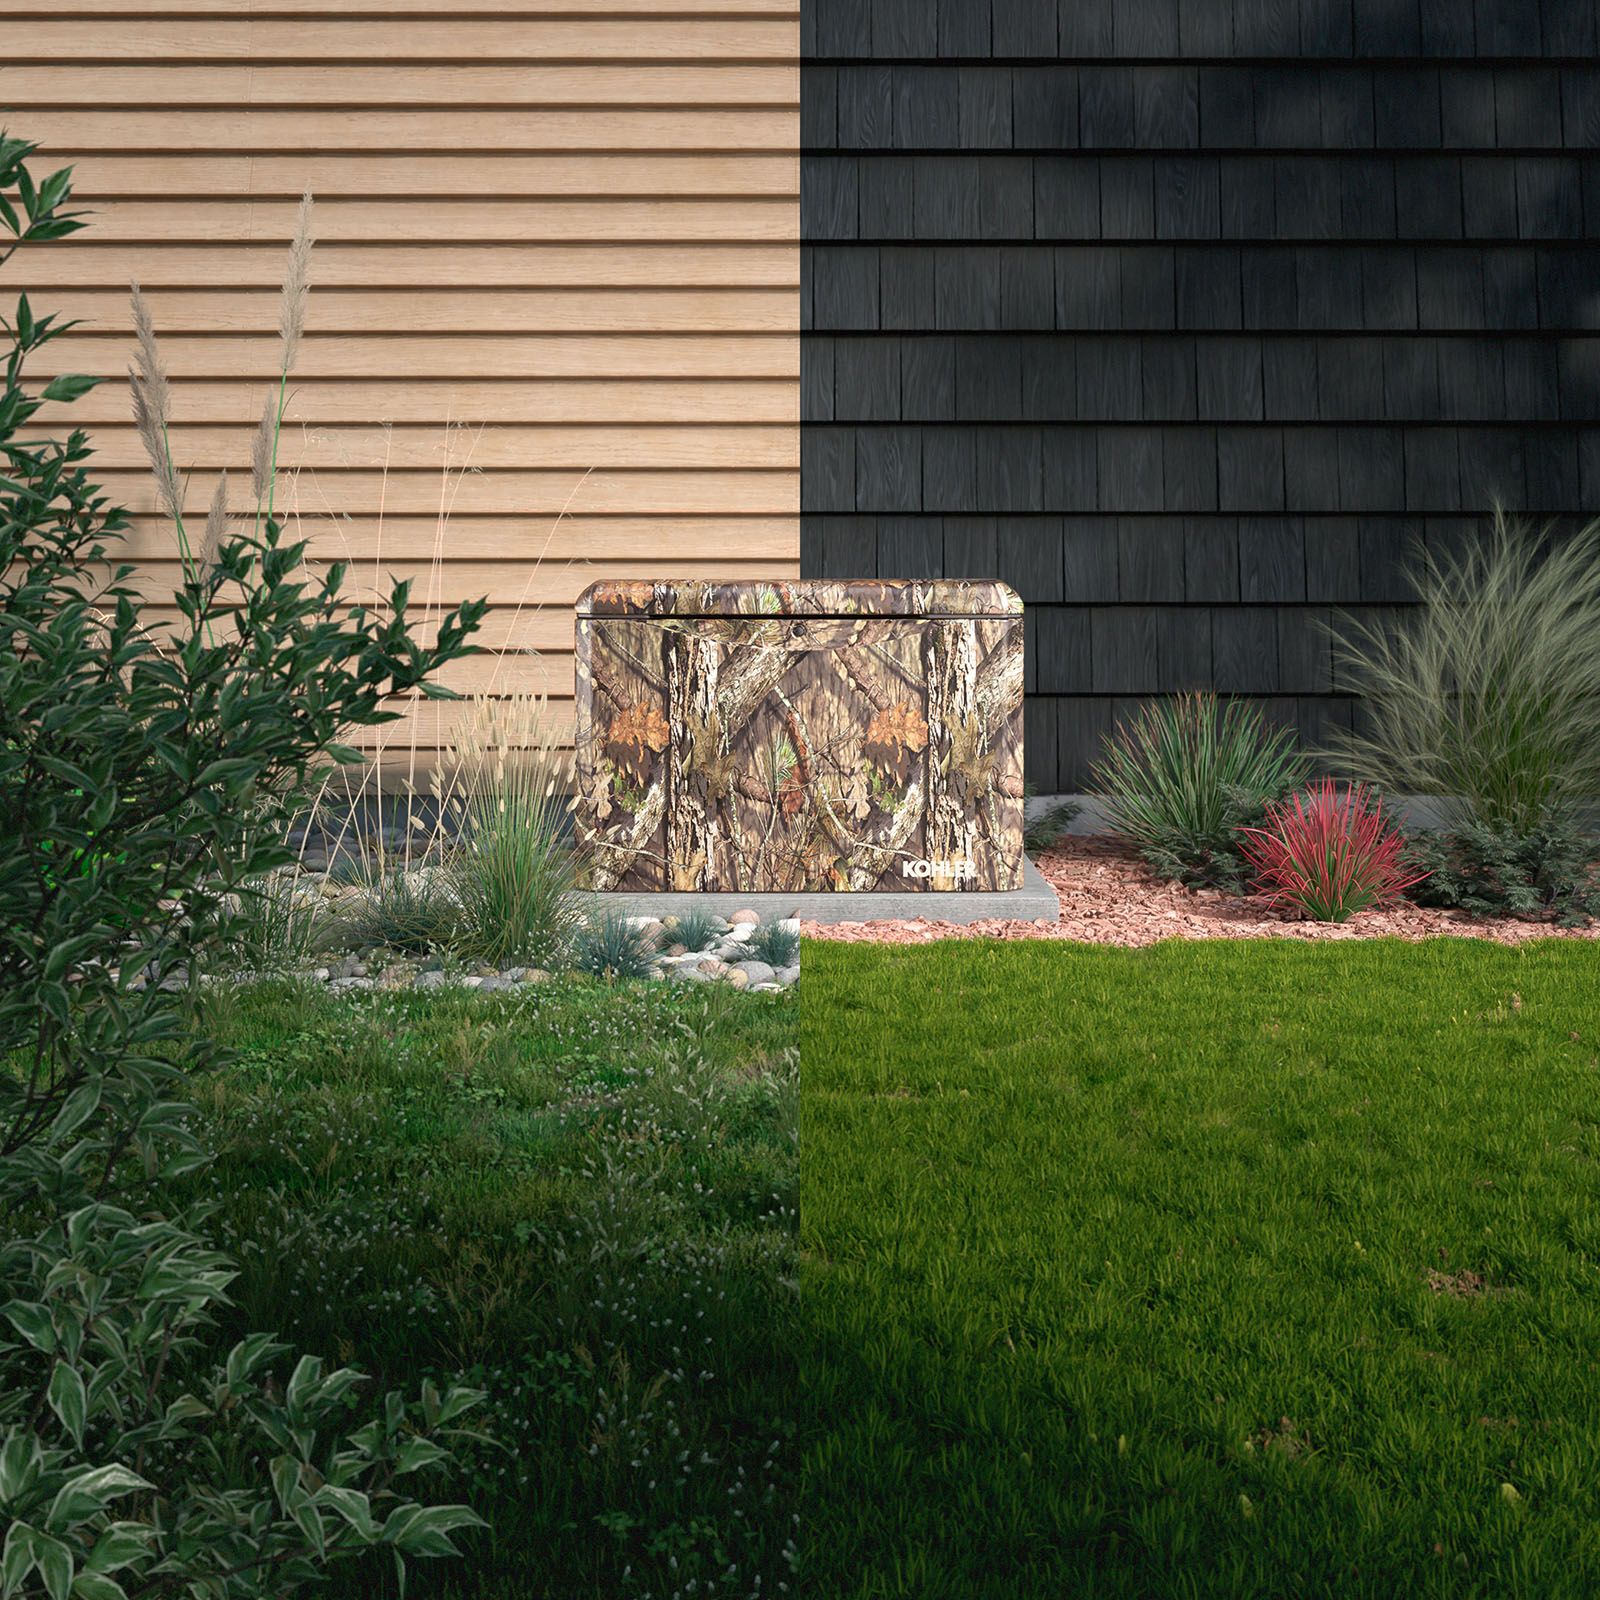 Image of a camouflage colored Kohler Home Generator outside of a house standing on a cement base in a pebble area with a lawn shrubs and flowers surrounding it